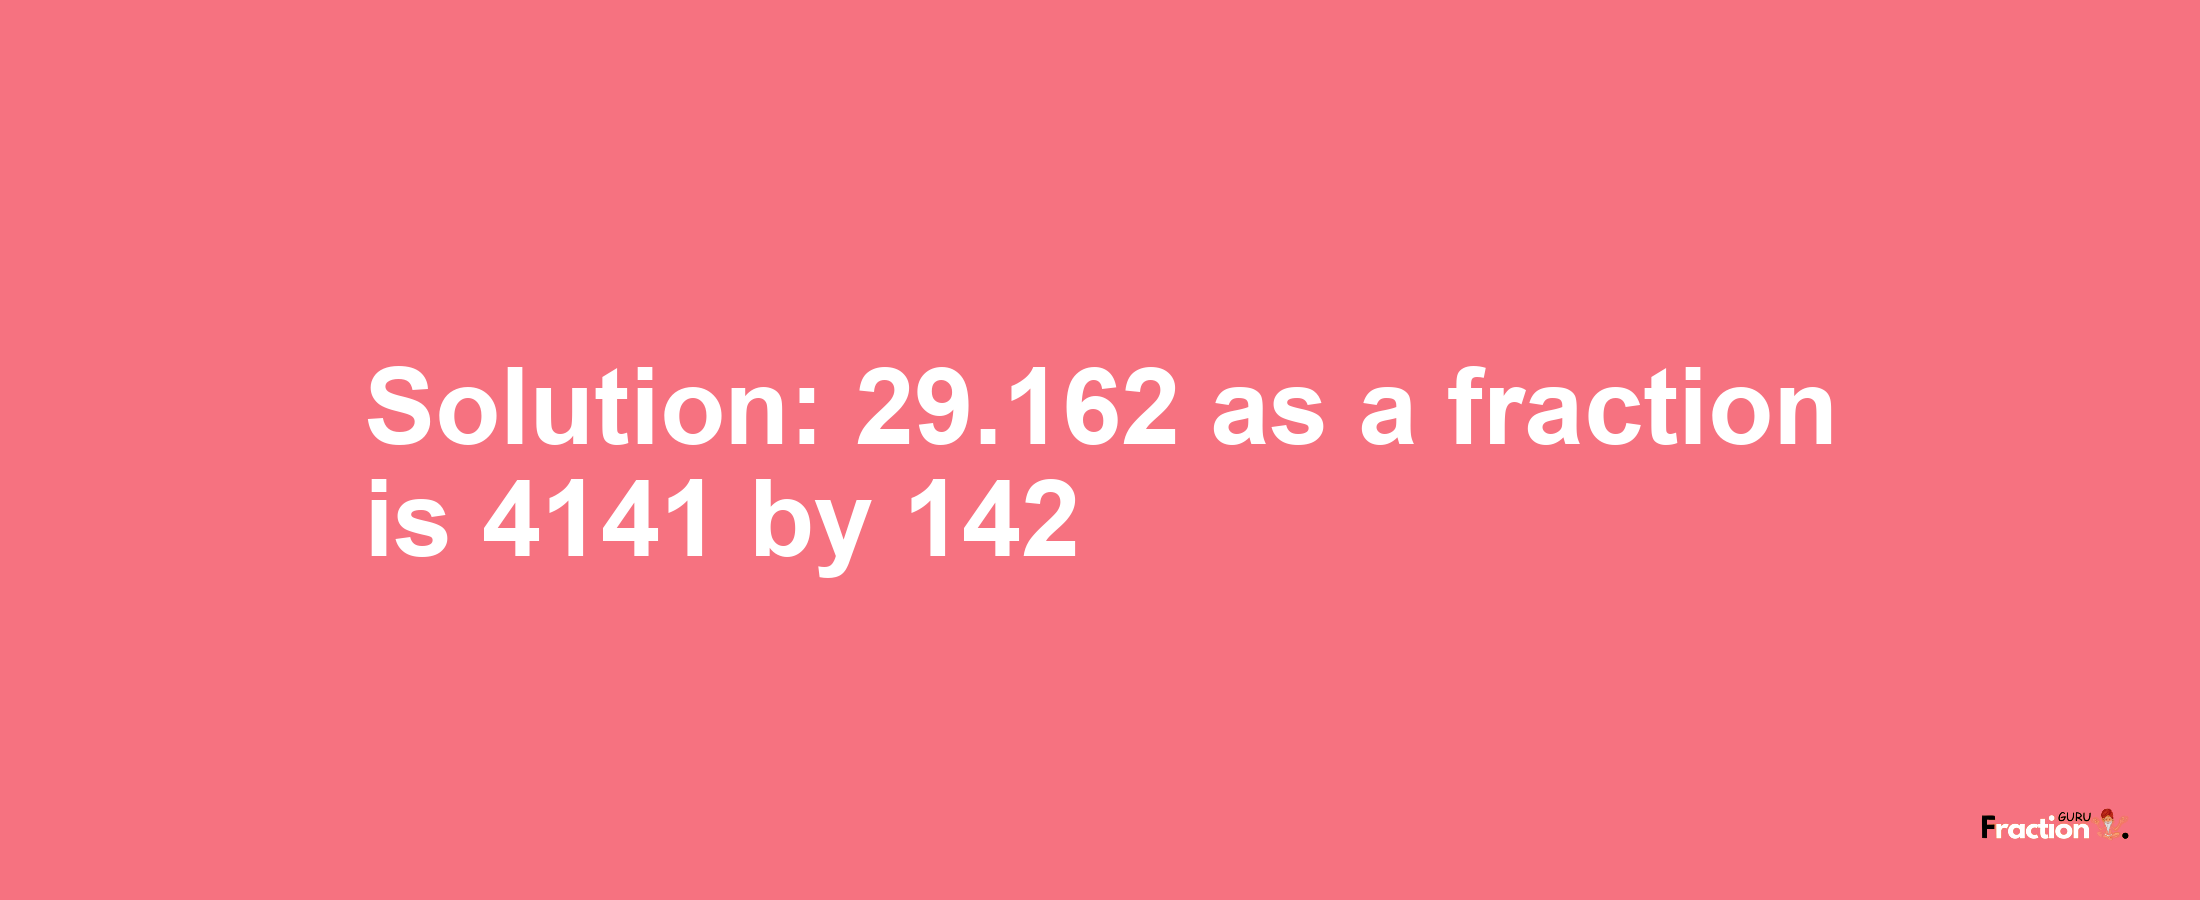 Solution:29.162 as a fraction is 4141/142